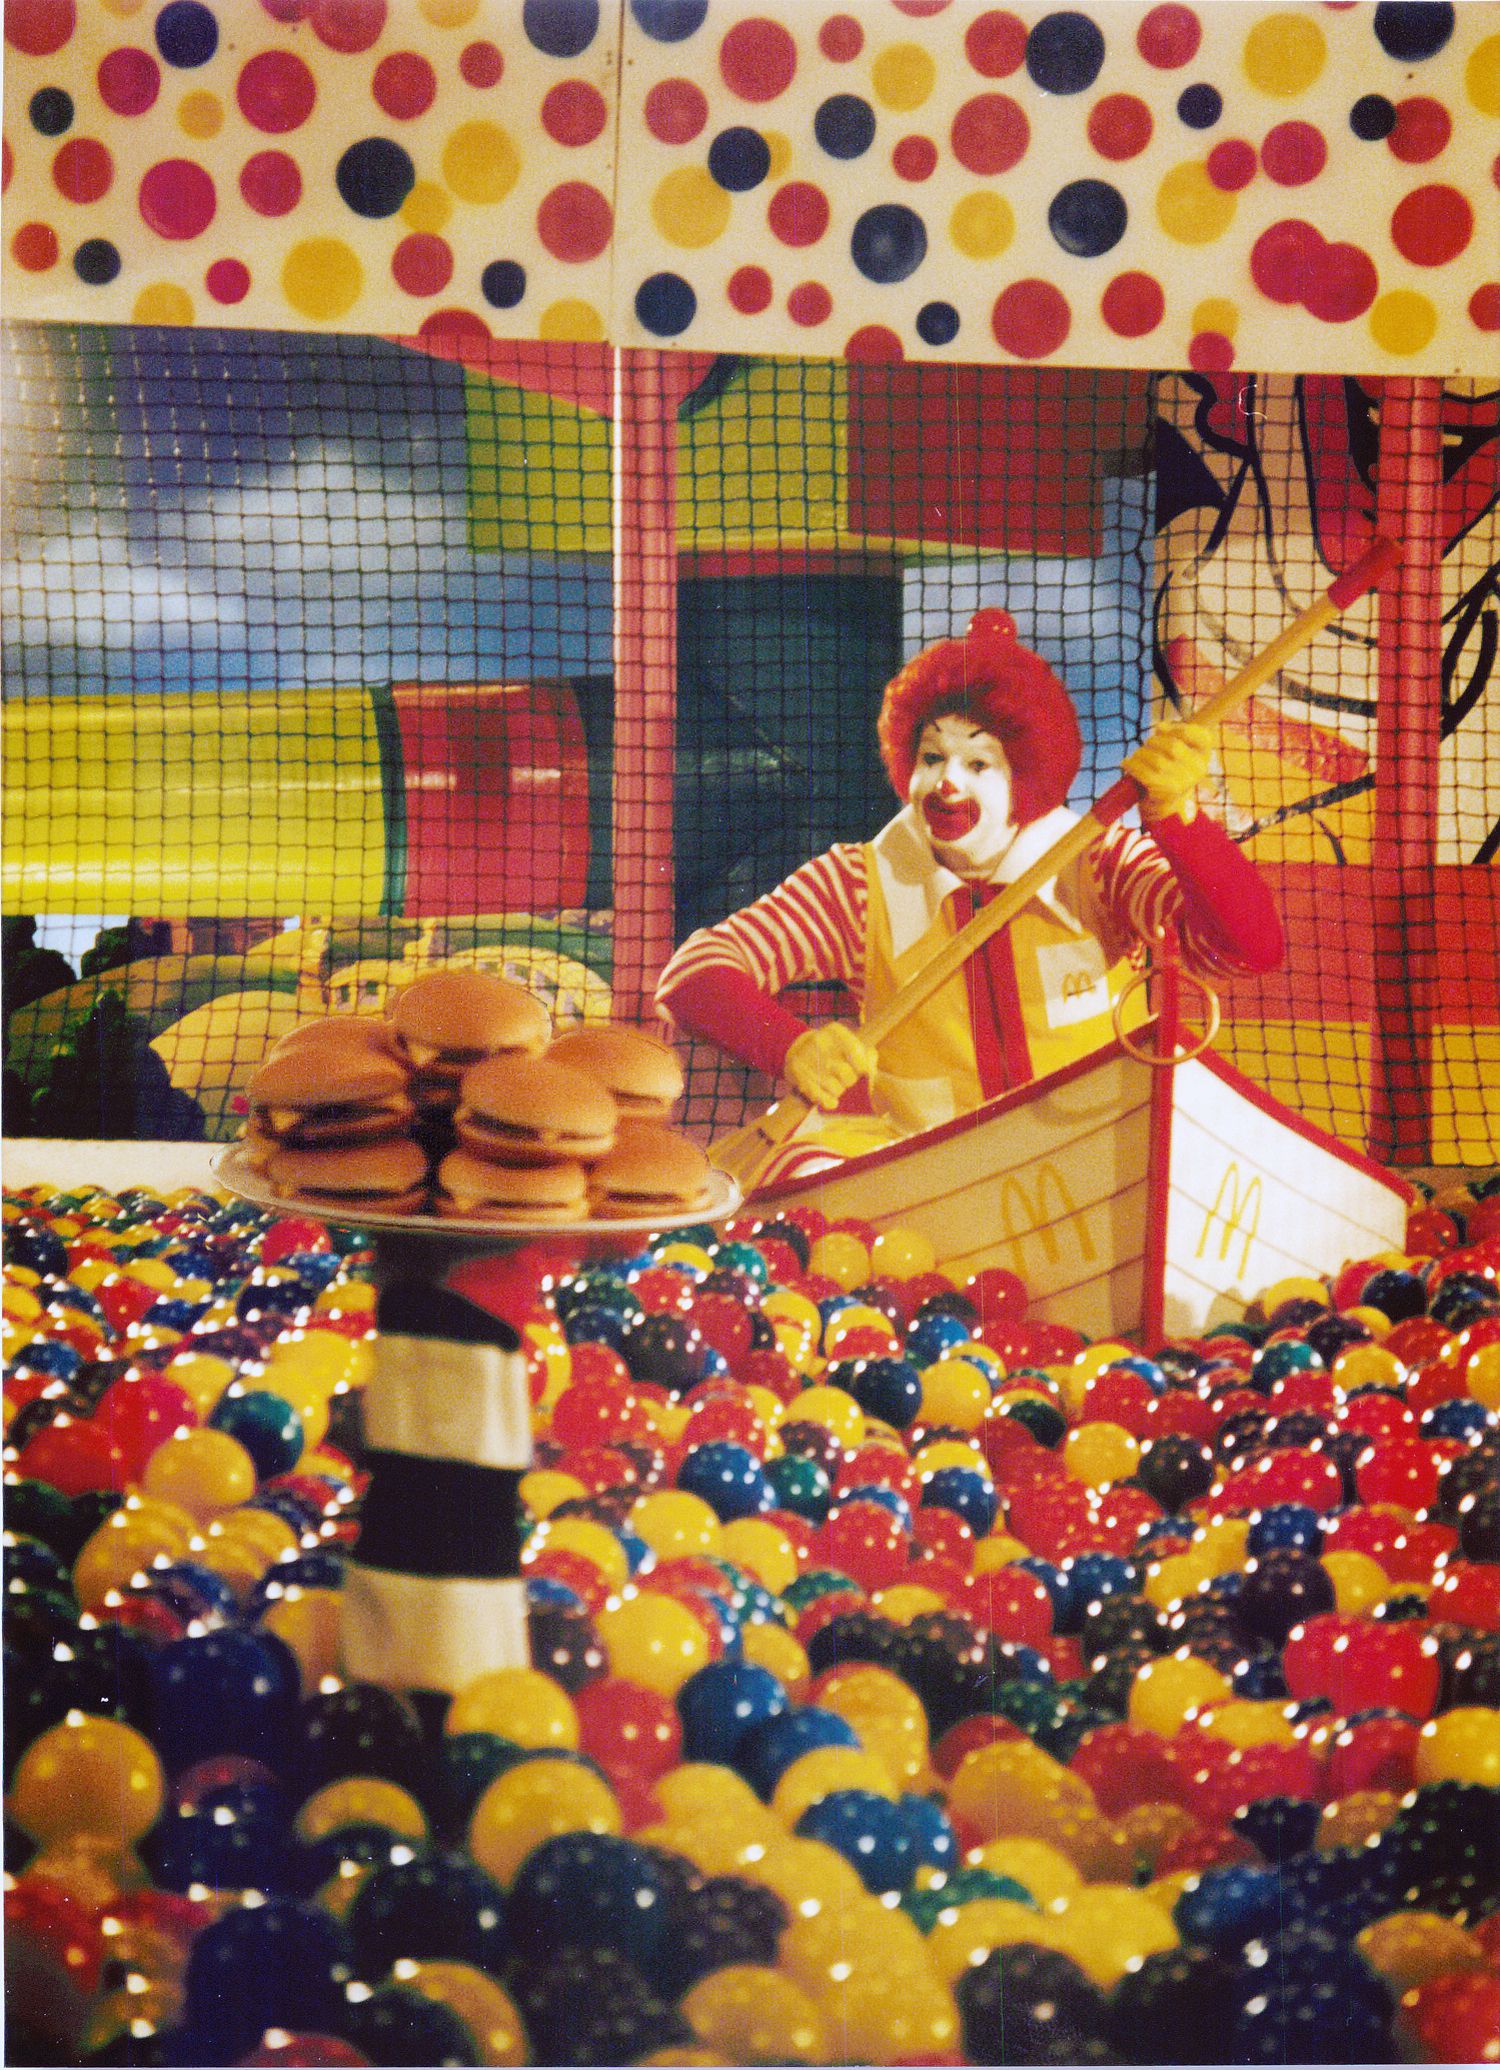 Once again Ronald McDonald is in pursuit of Hamburglar and a plate of delicious McDonald's Cheeseburgers, .this. Childhood memories, Cute image, Clowning around